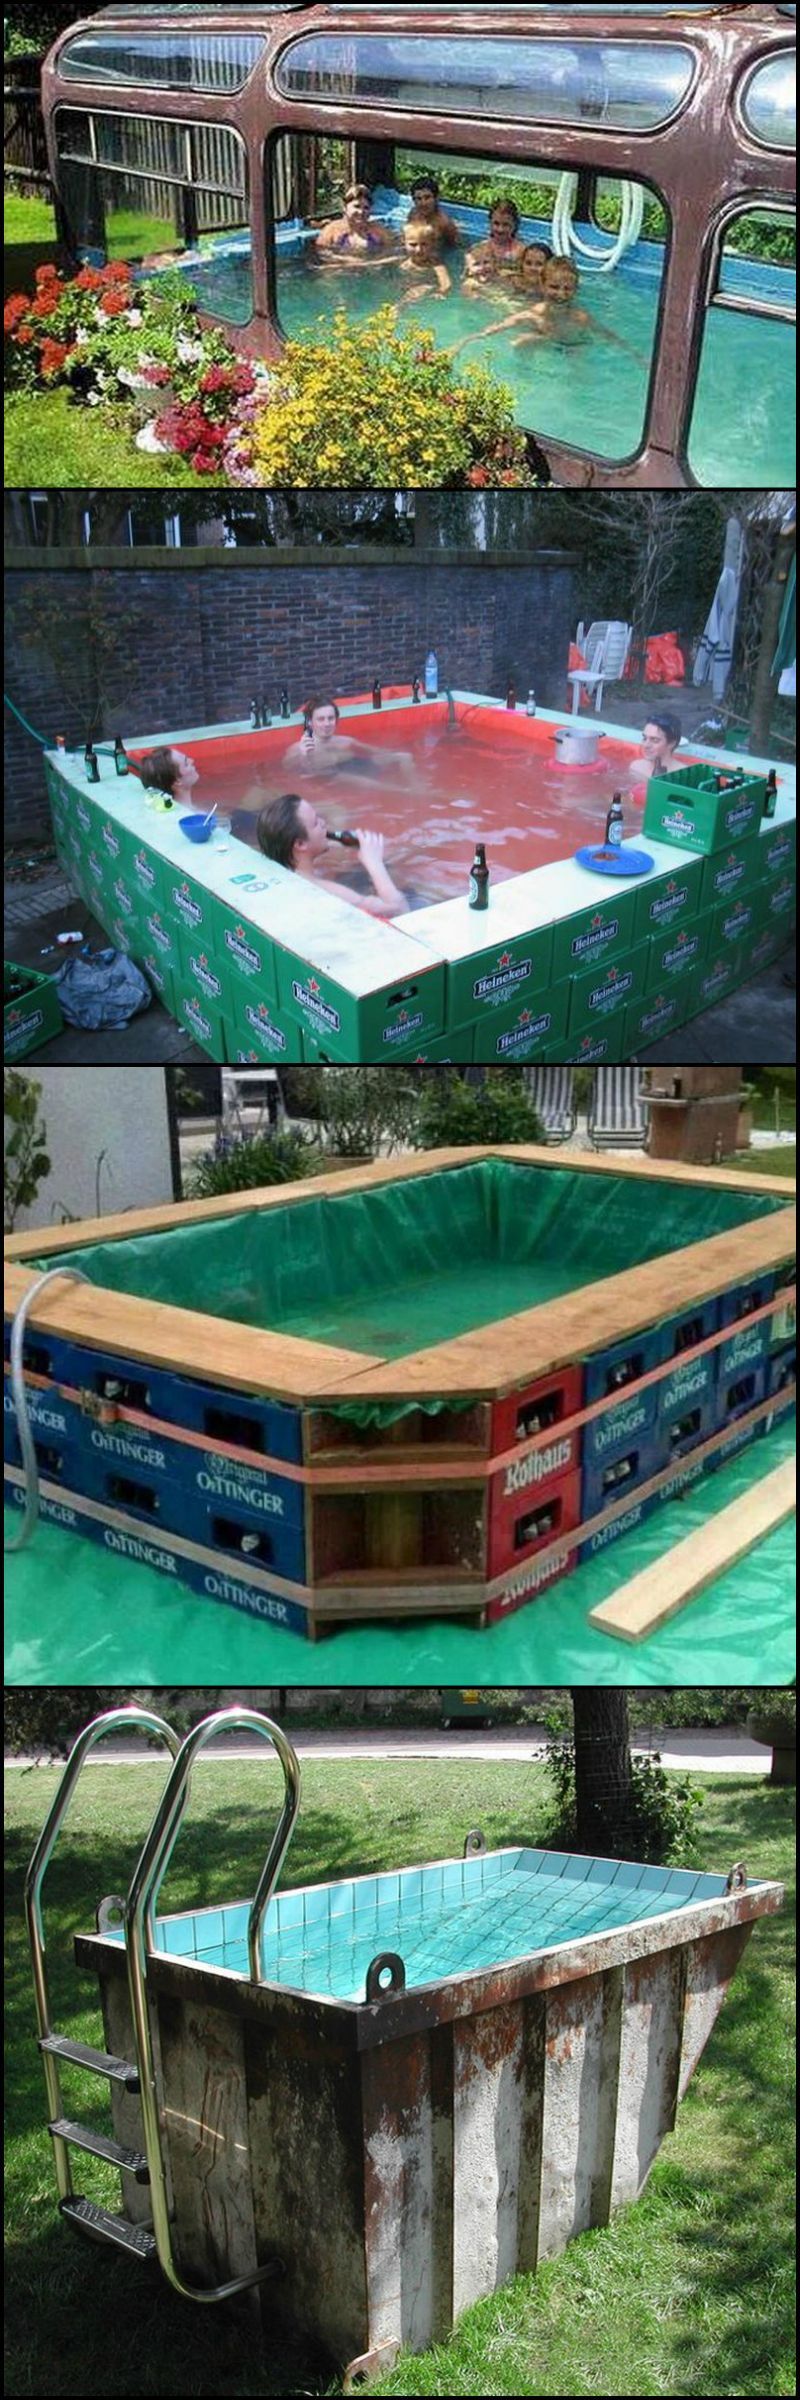 These are interesting, creative, and economical way to make your own swimming pool